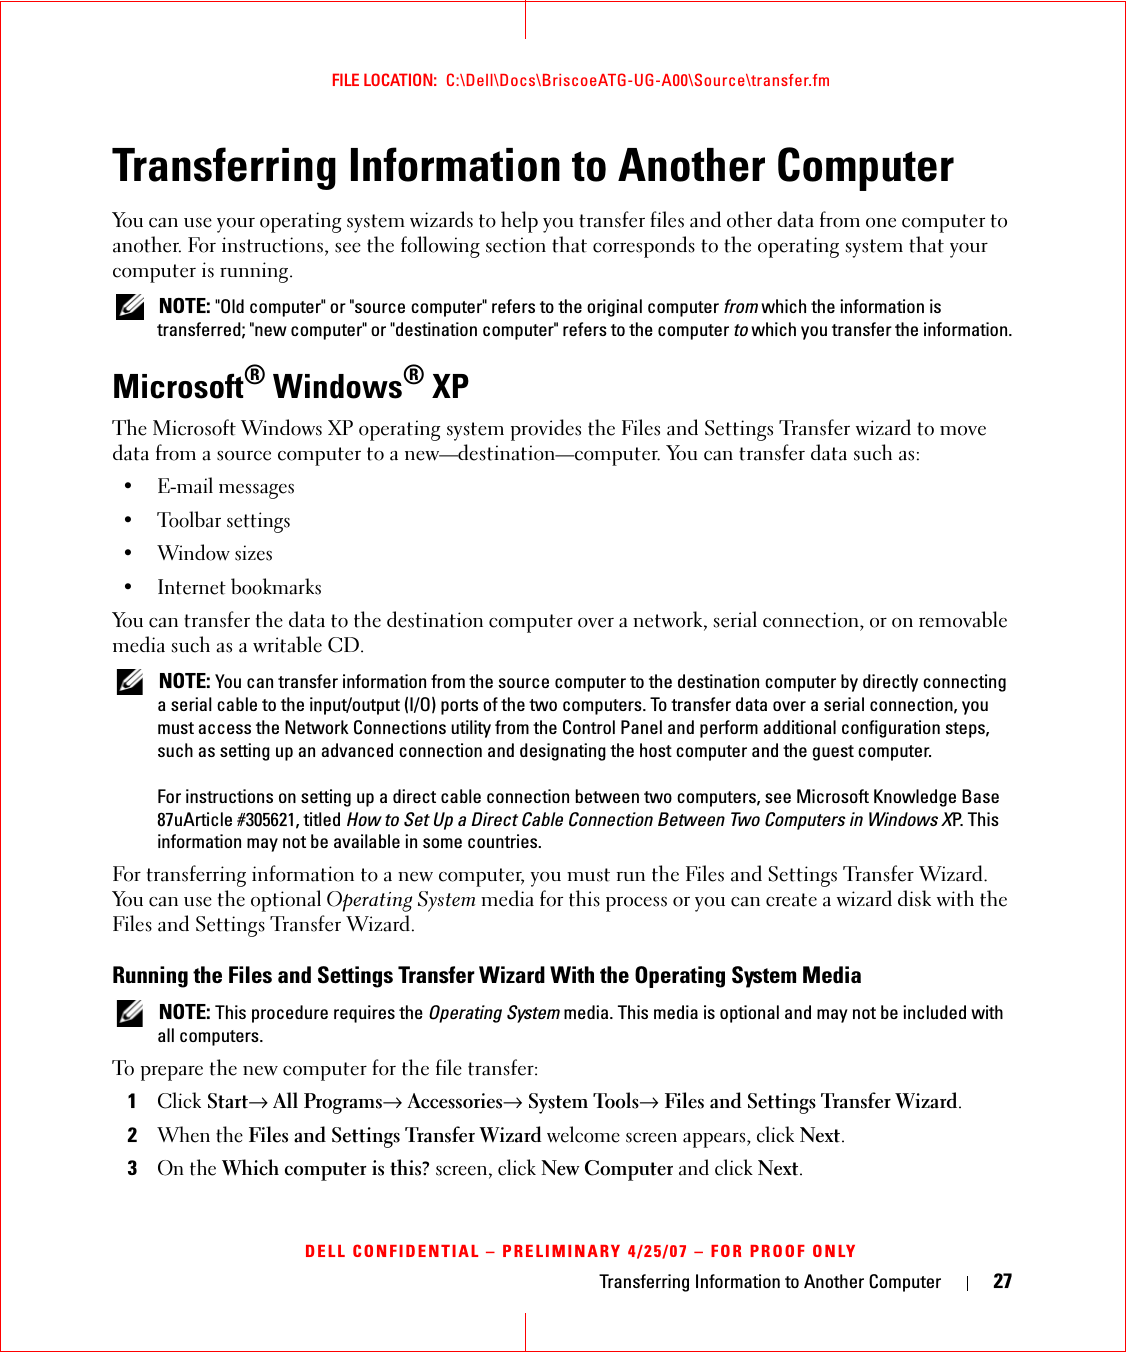 Transferring Information to Another Computer 27FILE LOCATION:  C:\Dell\Docs\BriscoeATG-UG-A00\Source\transfer.fmDELL CONFIDENTIAL – PRELIMINARY 4/25/07 – FOR PROOF ONLYTransferring Information to Another ComputerYou can use your operating system wizards to help you transfer files and other data from one computer to another. For instructions, see the following section that corresponds to the operating system that your computer is running.  NOTE: &quot;Old computer&quot; or &quot;source computer&quot; refers to the original computer from which the information is transferred; &quot;new computer&quot; or &quot;destination computer&quot; refers to the computer to which you transfer the information.Microsoft® Windows® XPThe Microsoft Windows XP operating system provides the Files and Settings Transfer wizard to move data from a source computer to a new—destination—computer. You can transfer data such as:• E-mail messages• Toolbar settings• Window sizes• Internet bookmarks You can transfer the data to the destination computer over a network, serial connection, or on removable media such as a writable CD. NOTE: You can transfer information from the source computer to the destination computer by directly connecting a serial cable to the input/output (I/O) ports of the two computers. To transfer data over a serial connection, you must access the Network Connections utility from the Control Panel and perform additional configuration steps, such as setting up an advanced connection and designating the host computer and the guest computer.For instructions on setting up a direct cable connection between two computers, see Microsoft Knowledge Base 87uArticle #305621, titled How to Set Up a Direct Cable Connection Between Two Computers in Windows XP. This information may not be available in some countries.For transferring information to a new computer, you must run the Files and Settings Transfer Wizard. You can use the optional Operating System media for this process or you can create a wizard disk with the Files and Settings Transfer Wizard.Running the Files and Settings Transfer Wizard With the Operating System Media NOTE: This procedure requires the Operating System media. This media is optional and may not be included with all computers.To prepare the new computer for the file transfer:1Click Start→ All Programs→ Accessories→ System Tools→ Files and Settings Transfer Wizard.2When the Files and Settings Transfer Wizard welcome screen appears, click Next.3On the Which computer is this? screen, click New Computer and click Next.